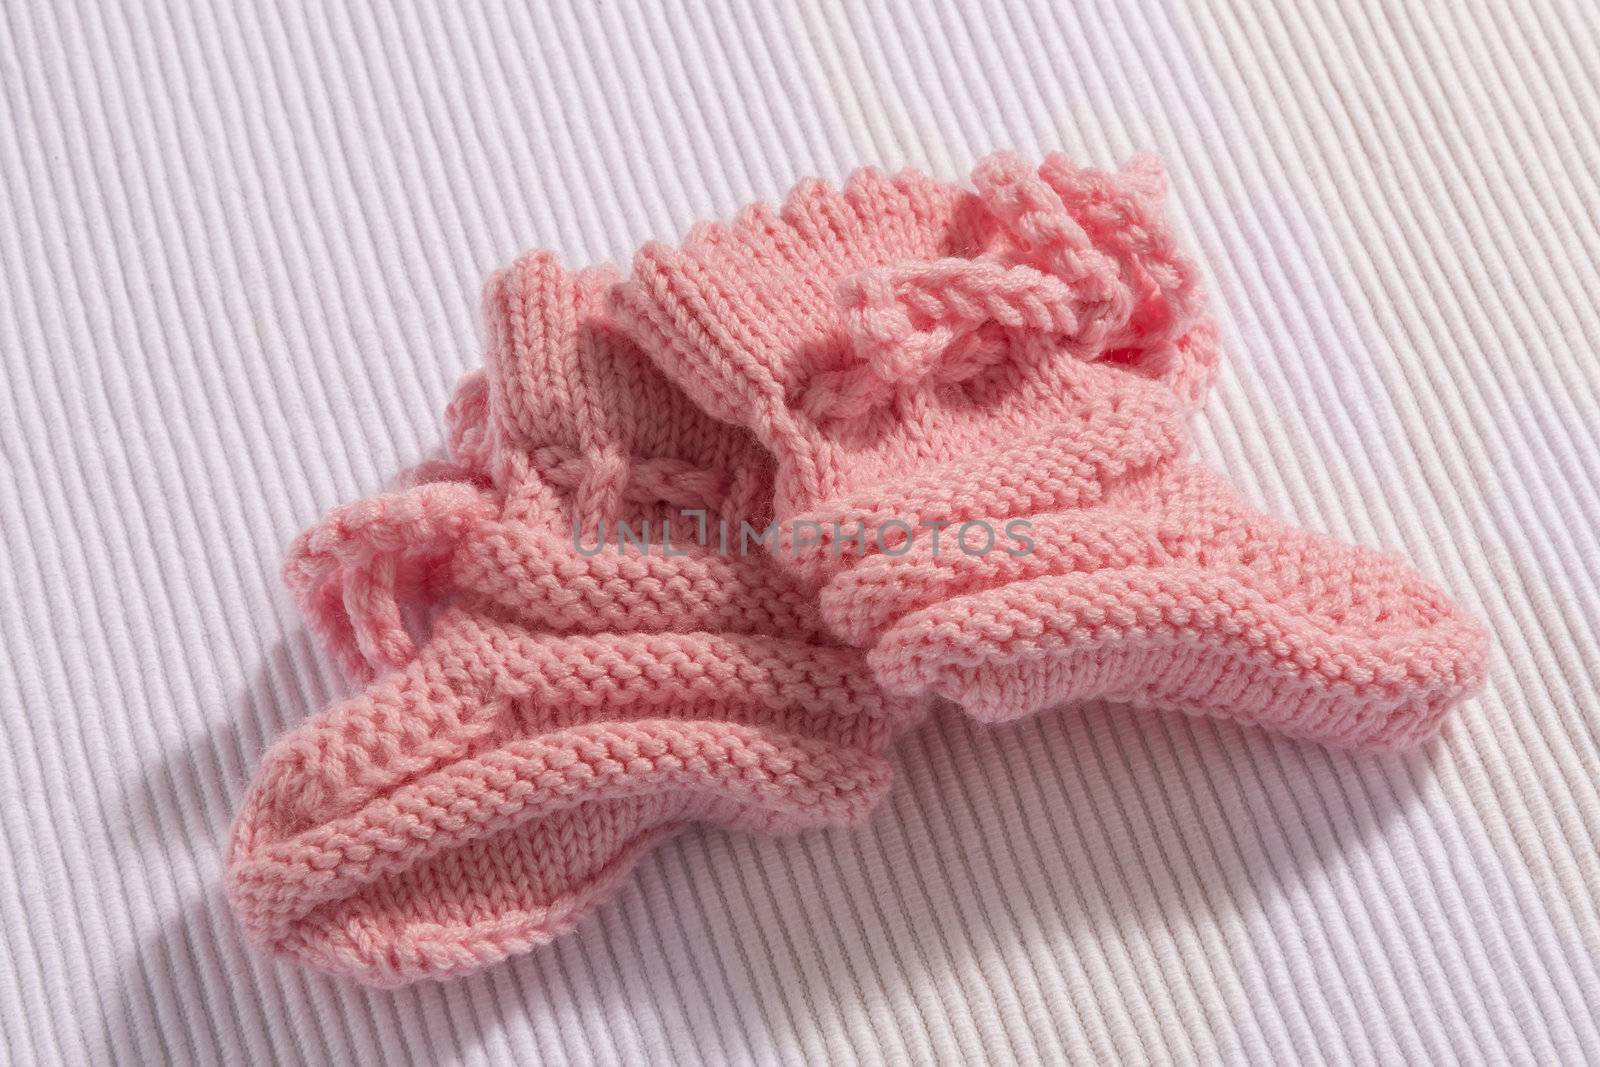 Pink baby socks on white background by w20er